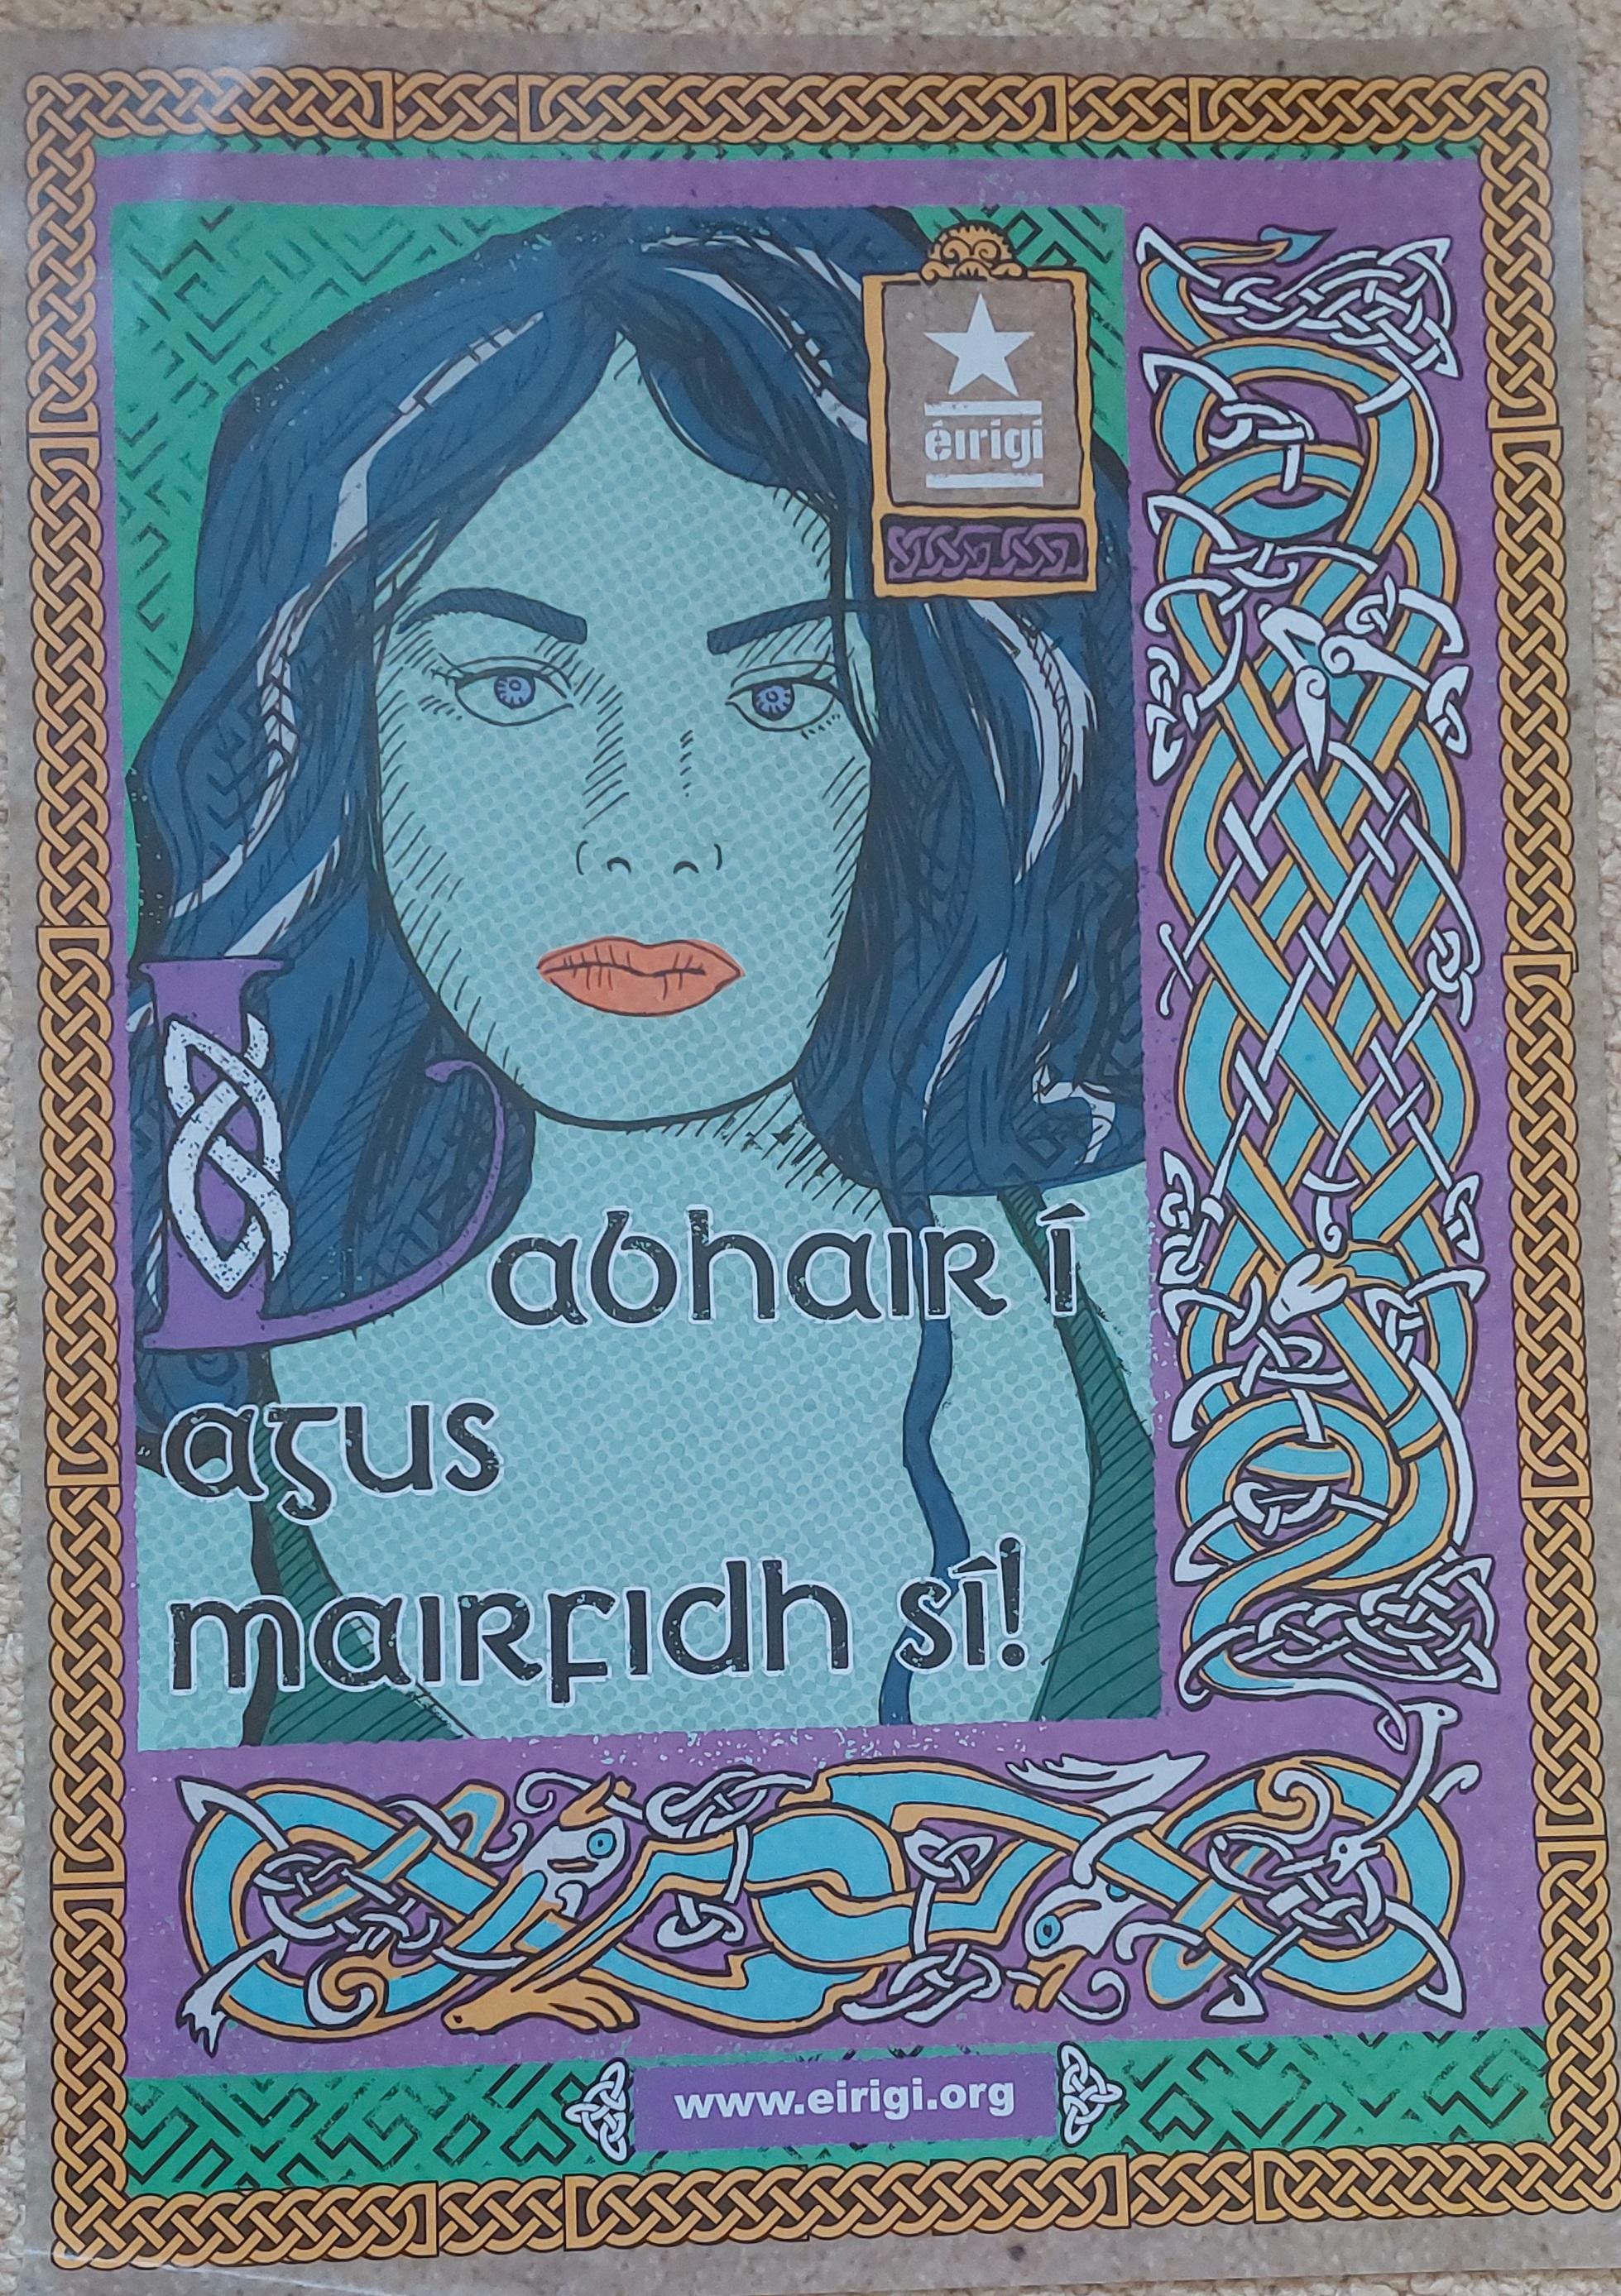 A poster reading Labhair Í agus Mairfidh Sí. The image is a screenprint-style picture of a woman with long dark hair, surrounded by a Celtic knot pattern.